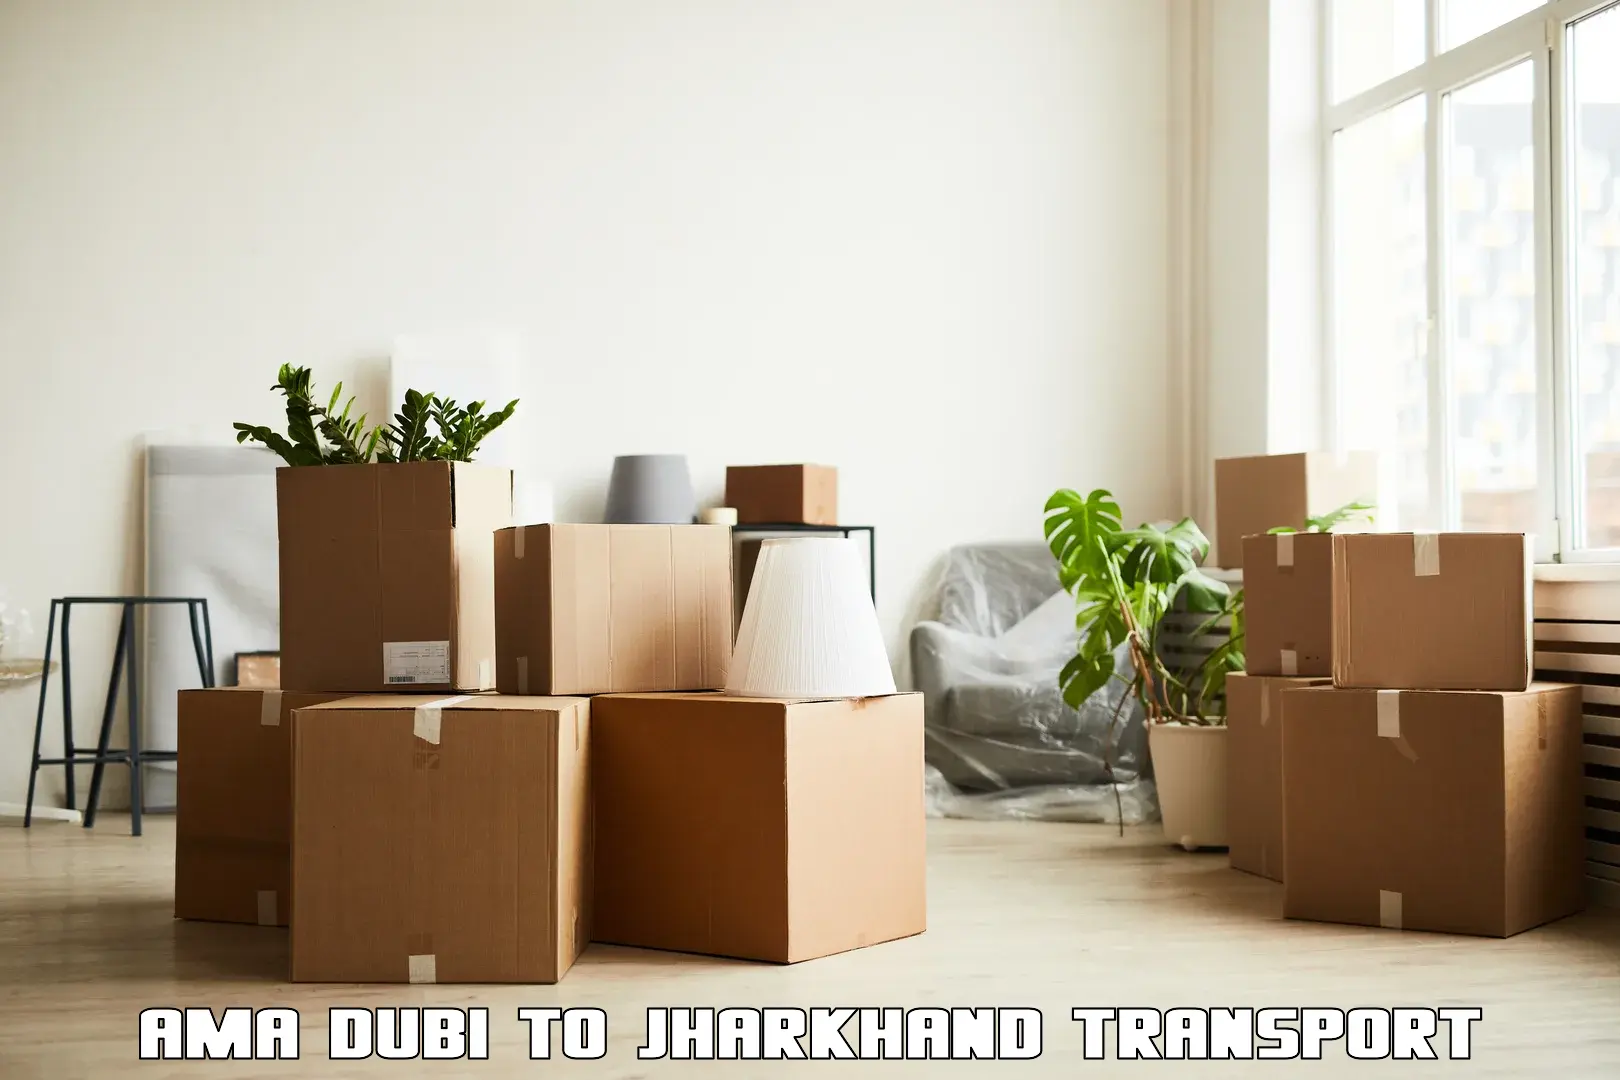 Transportation solution services Ama Dubi to Khunti